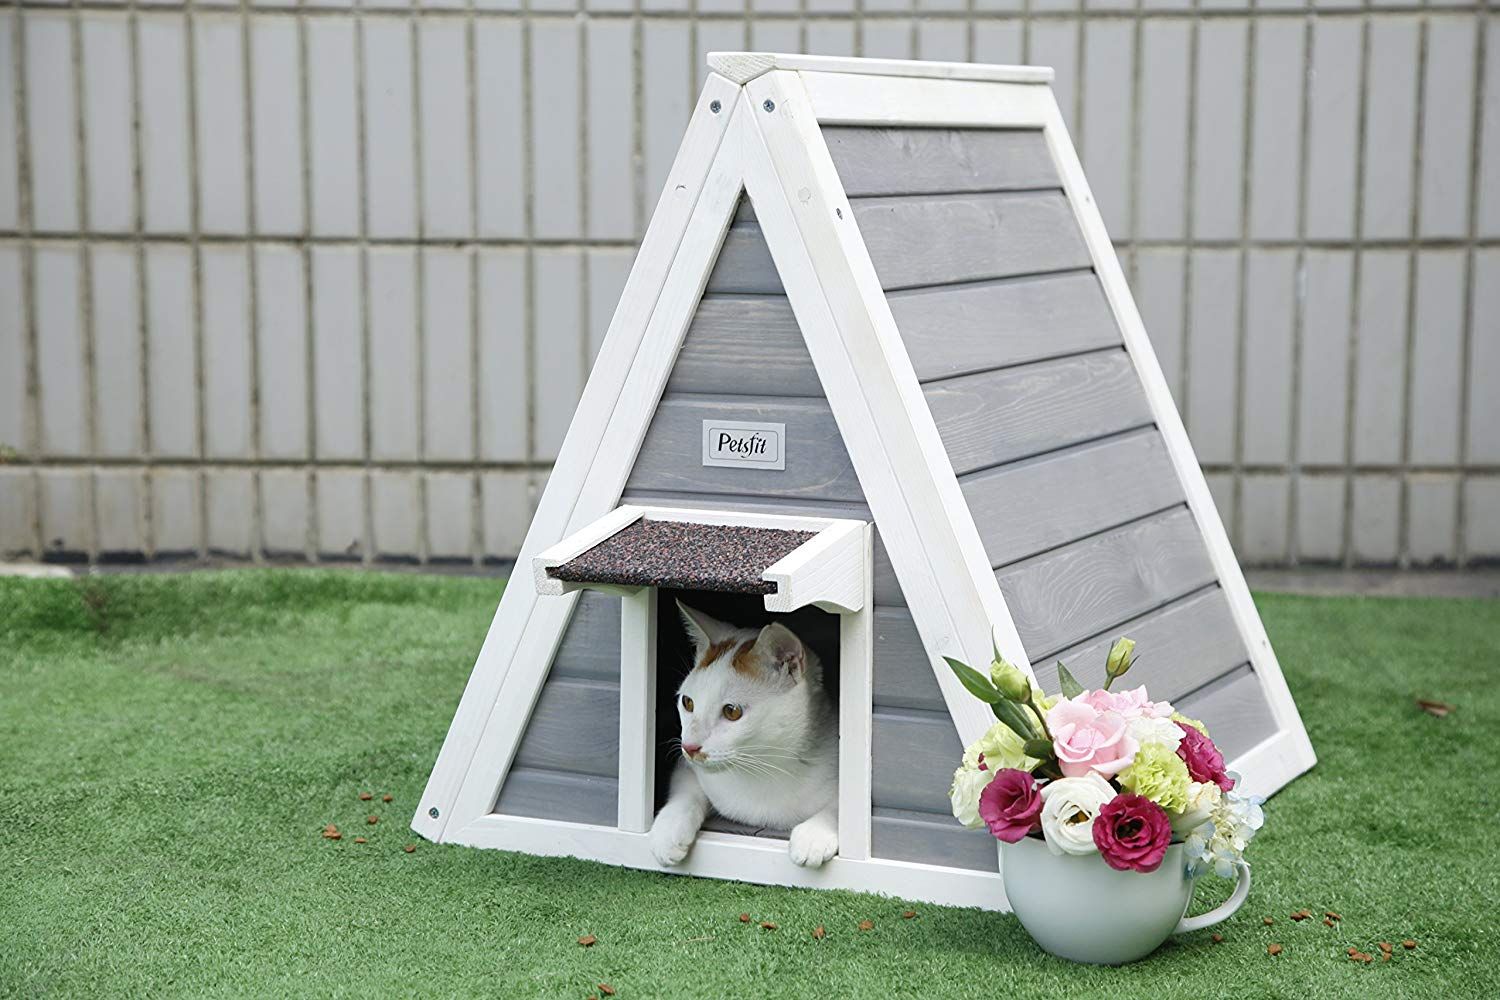 15 Best Cat Houses And Condos 2019, Cat Igloo Outdoor House